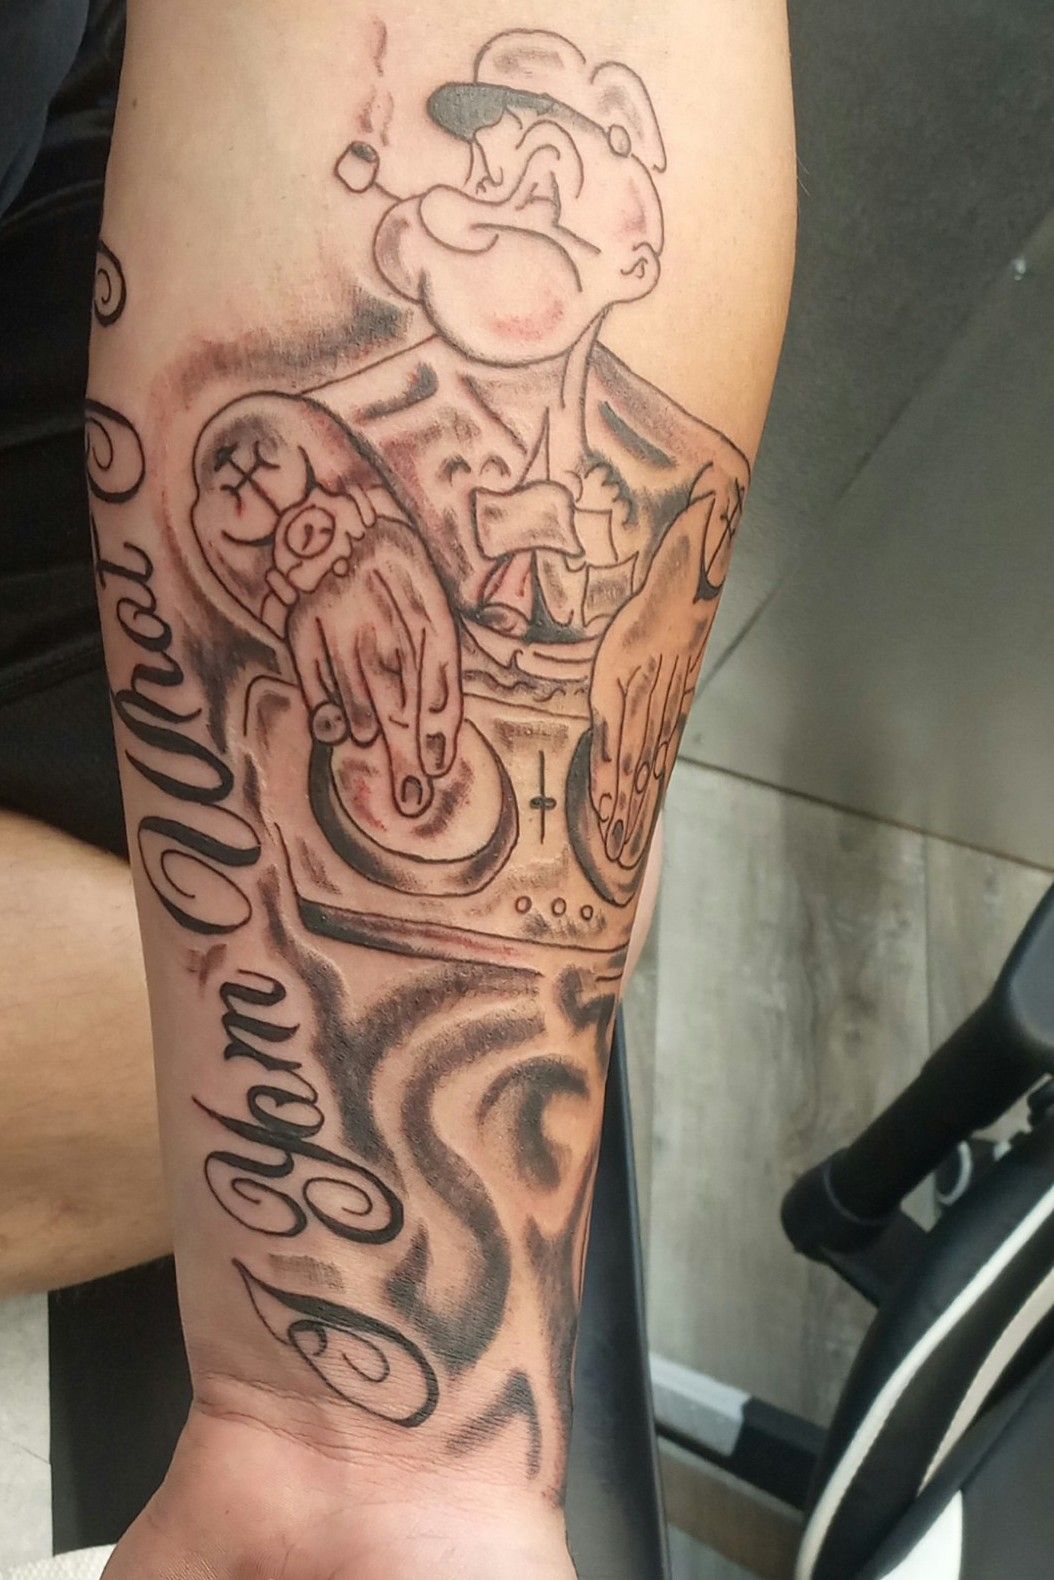 Had this cool Popeye memorial... - Flashpoint Tattoo Company | Facebook